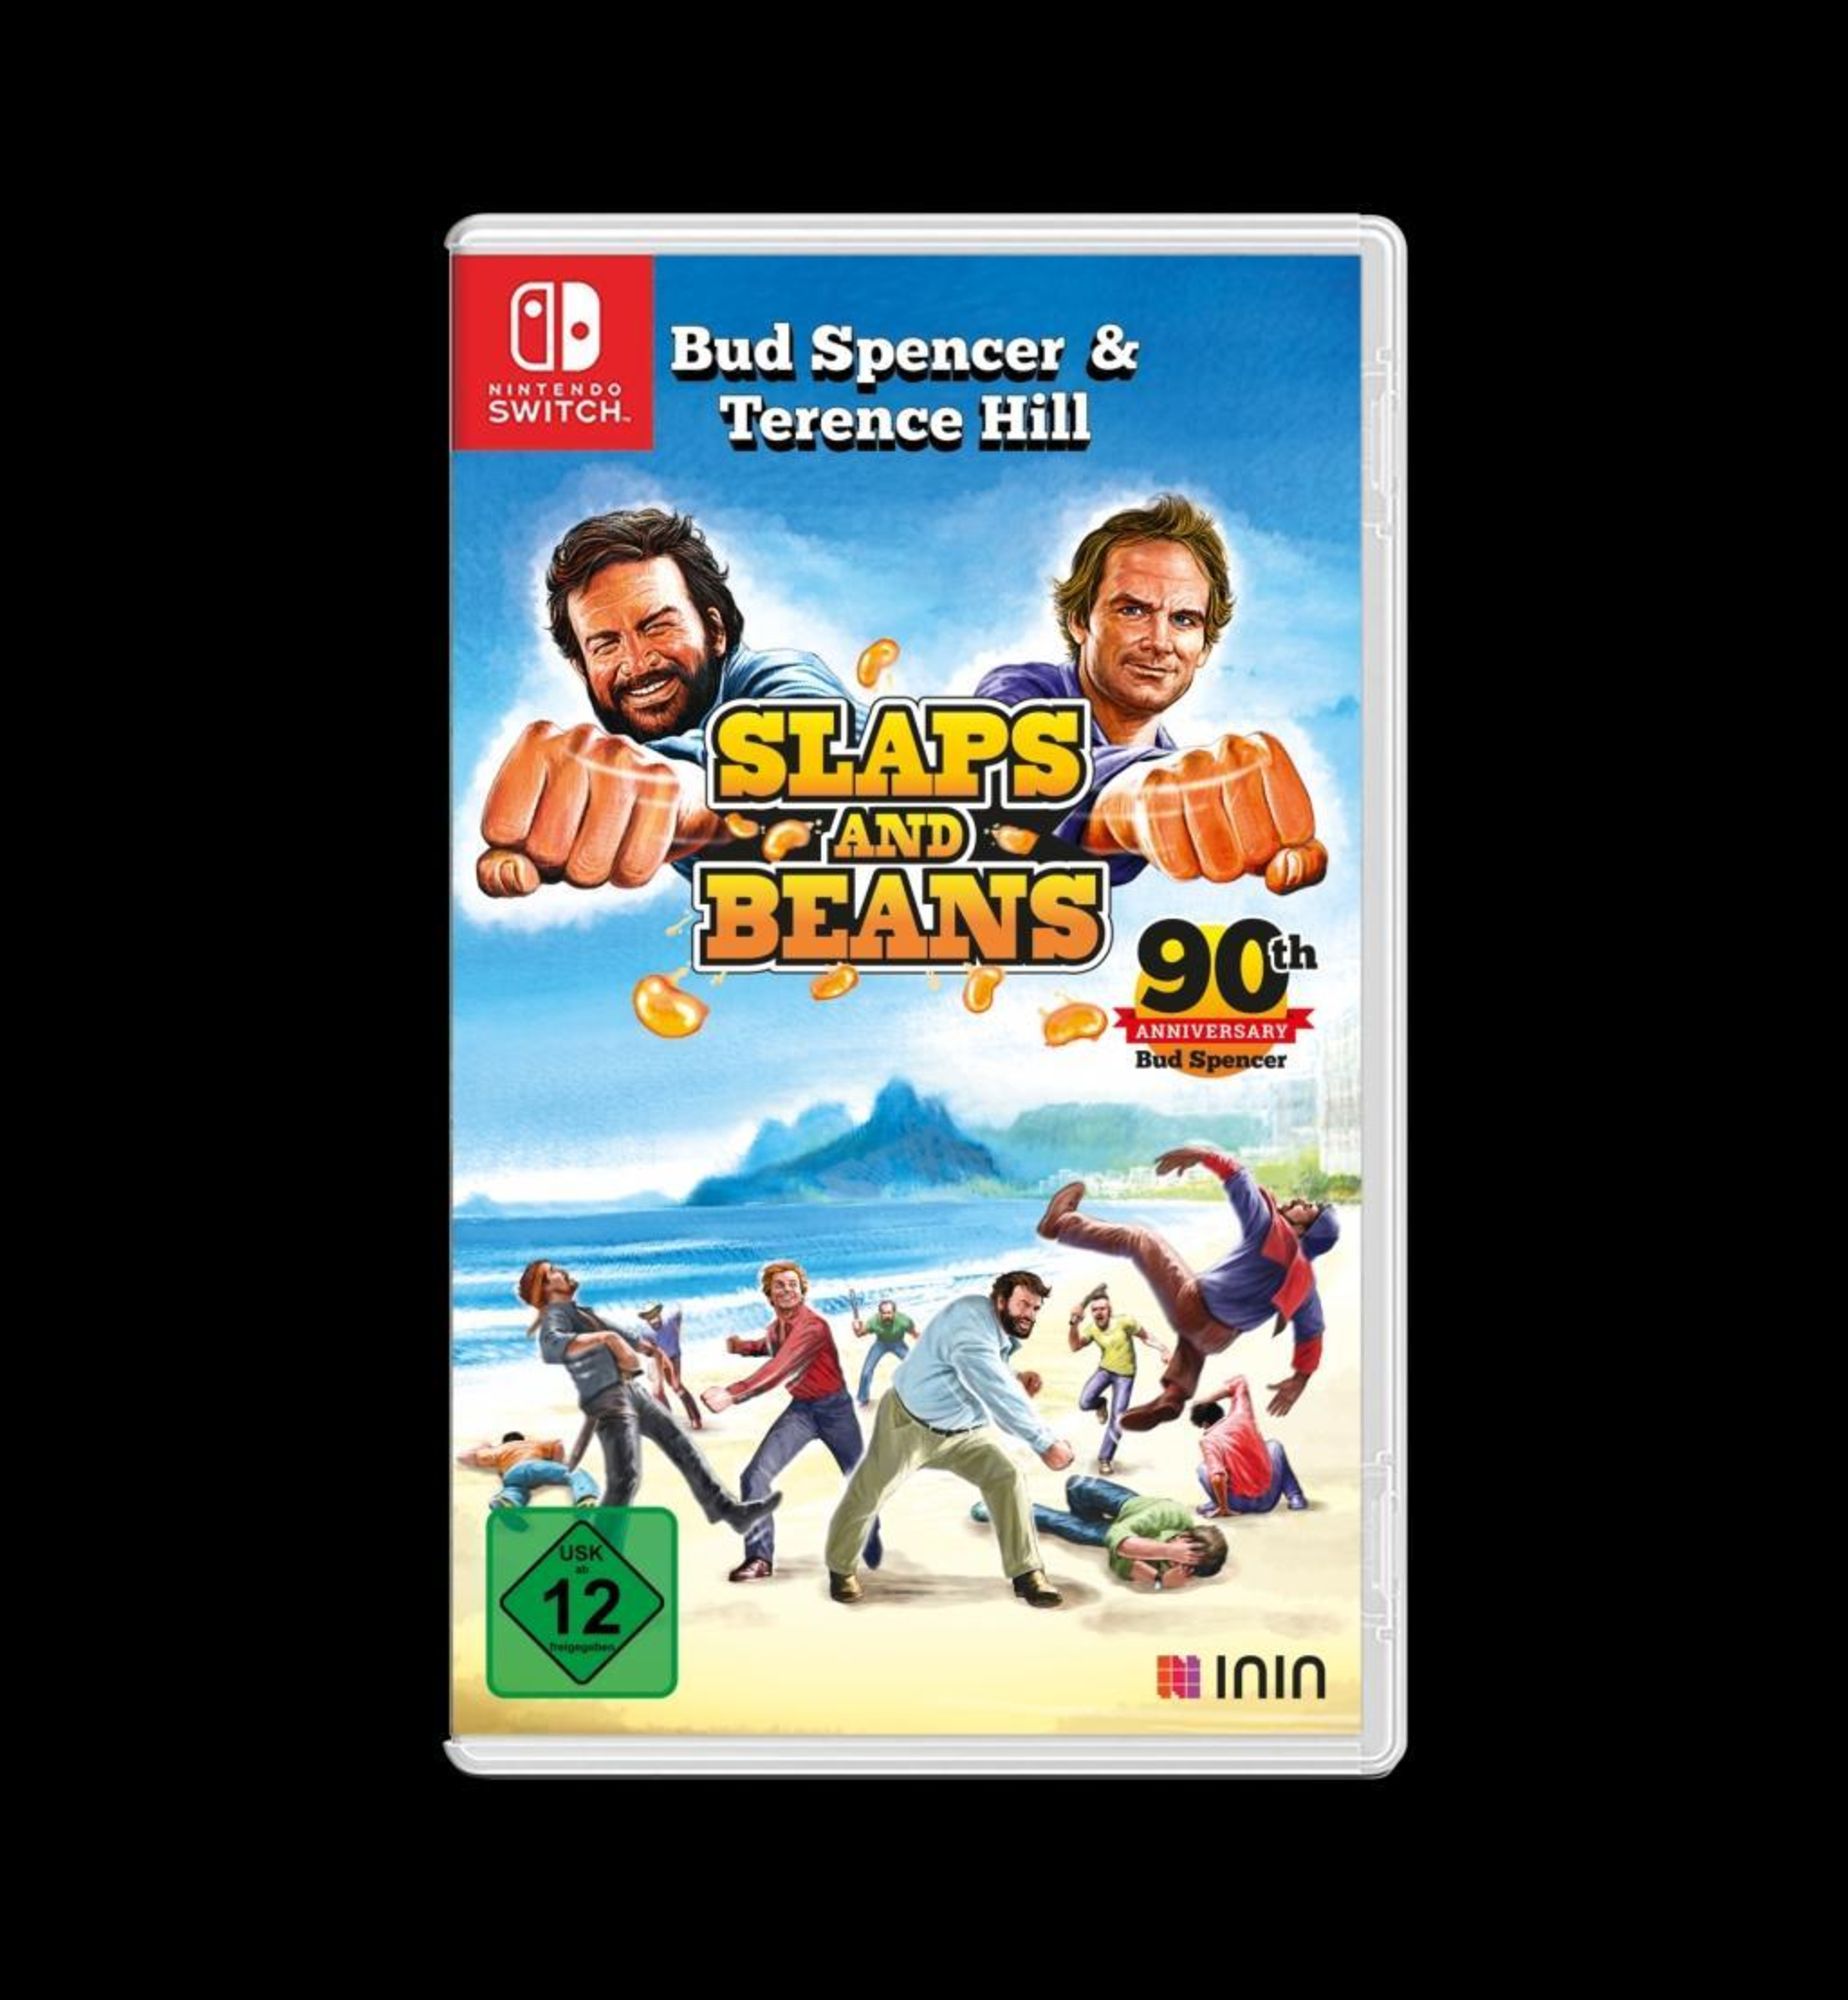 Bud Spencer & Terence Hill \'Nintendo and für - Switch\' Beans\' kaufen Slaps